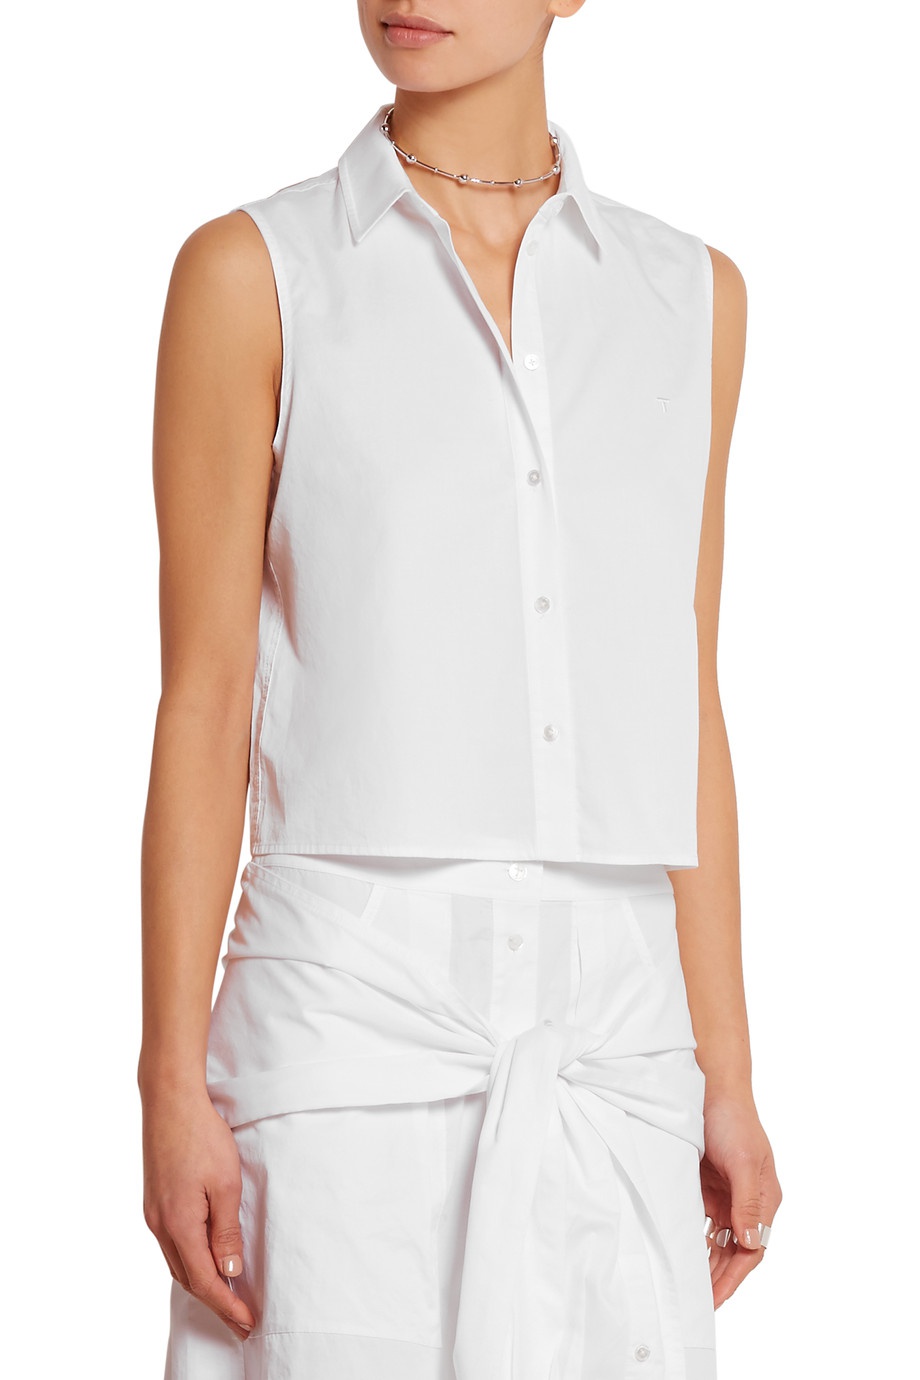 T by Alexander-Wang cropped cotton-twill top